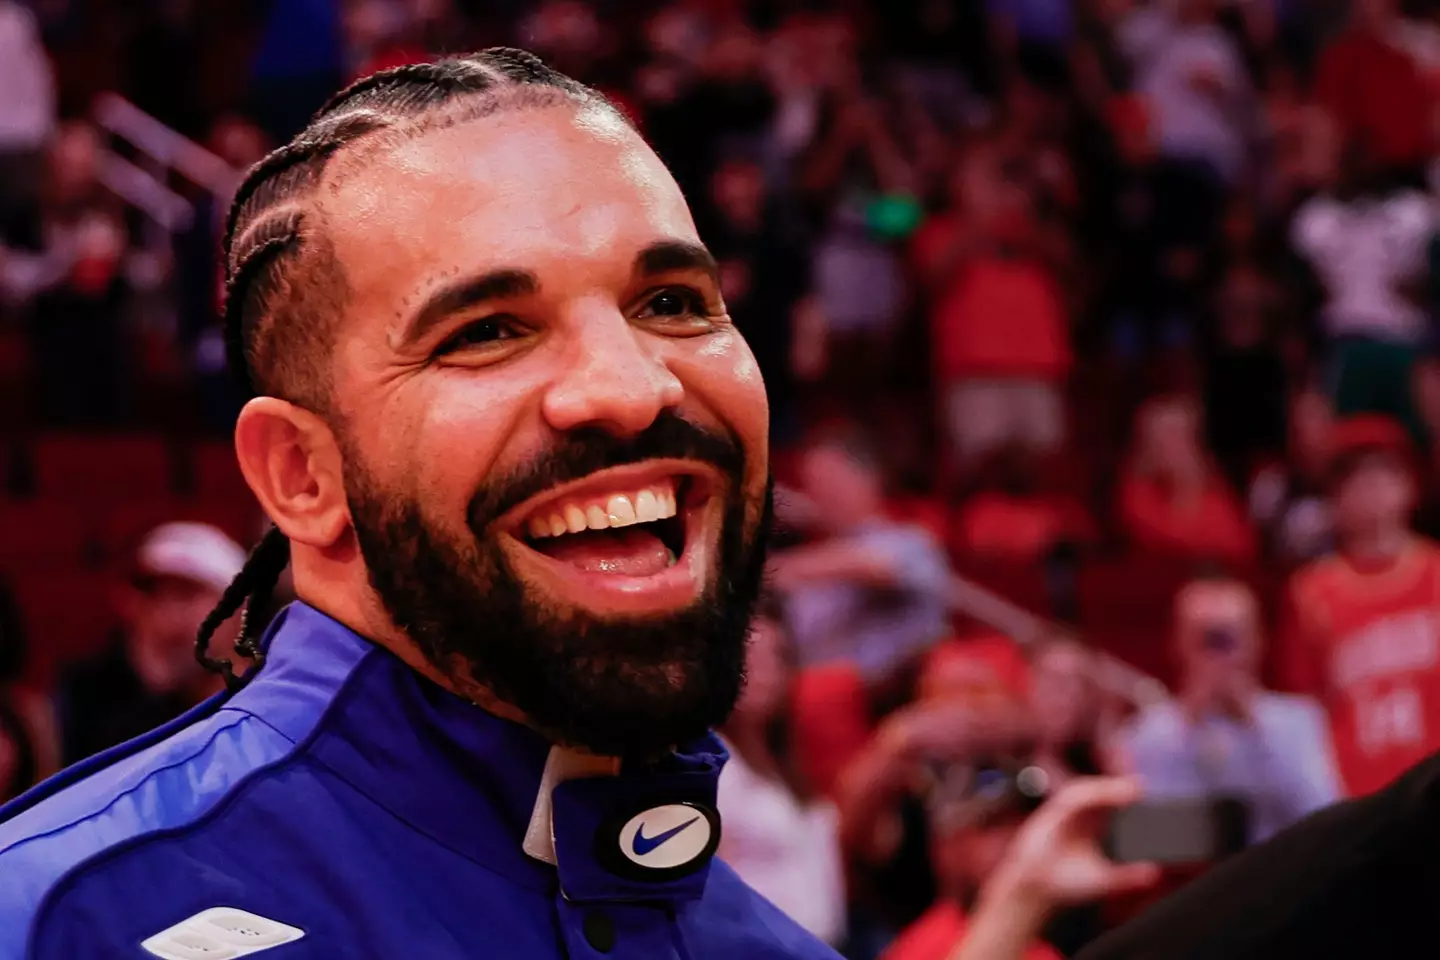 Drake issued a response to Kendrick Lamar's song last month. (Carmen Mandato/Getty Images)